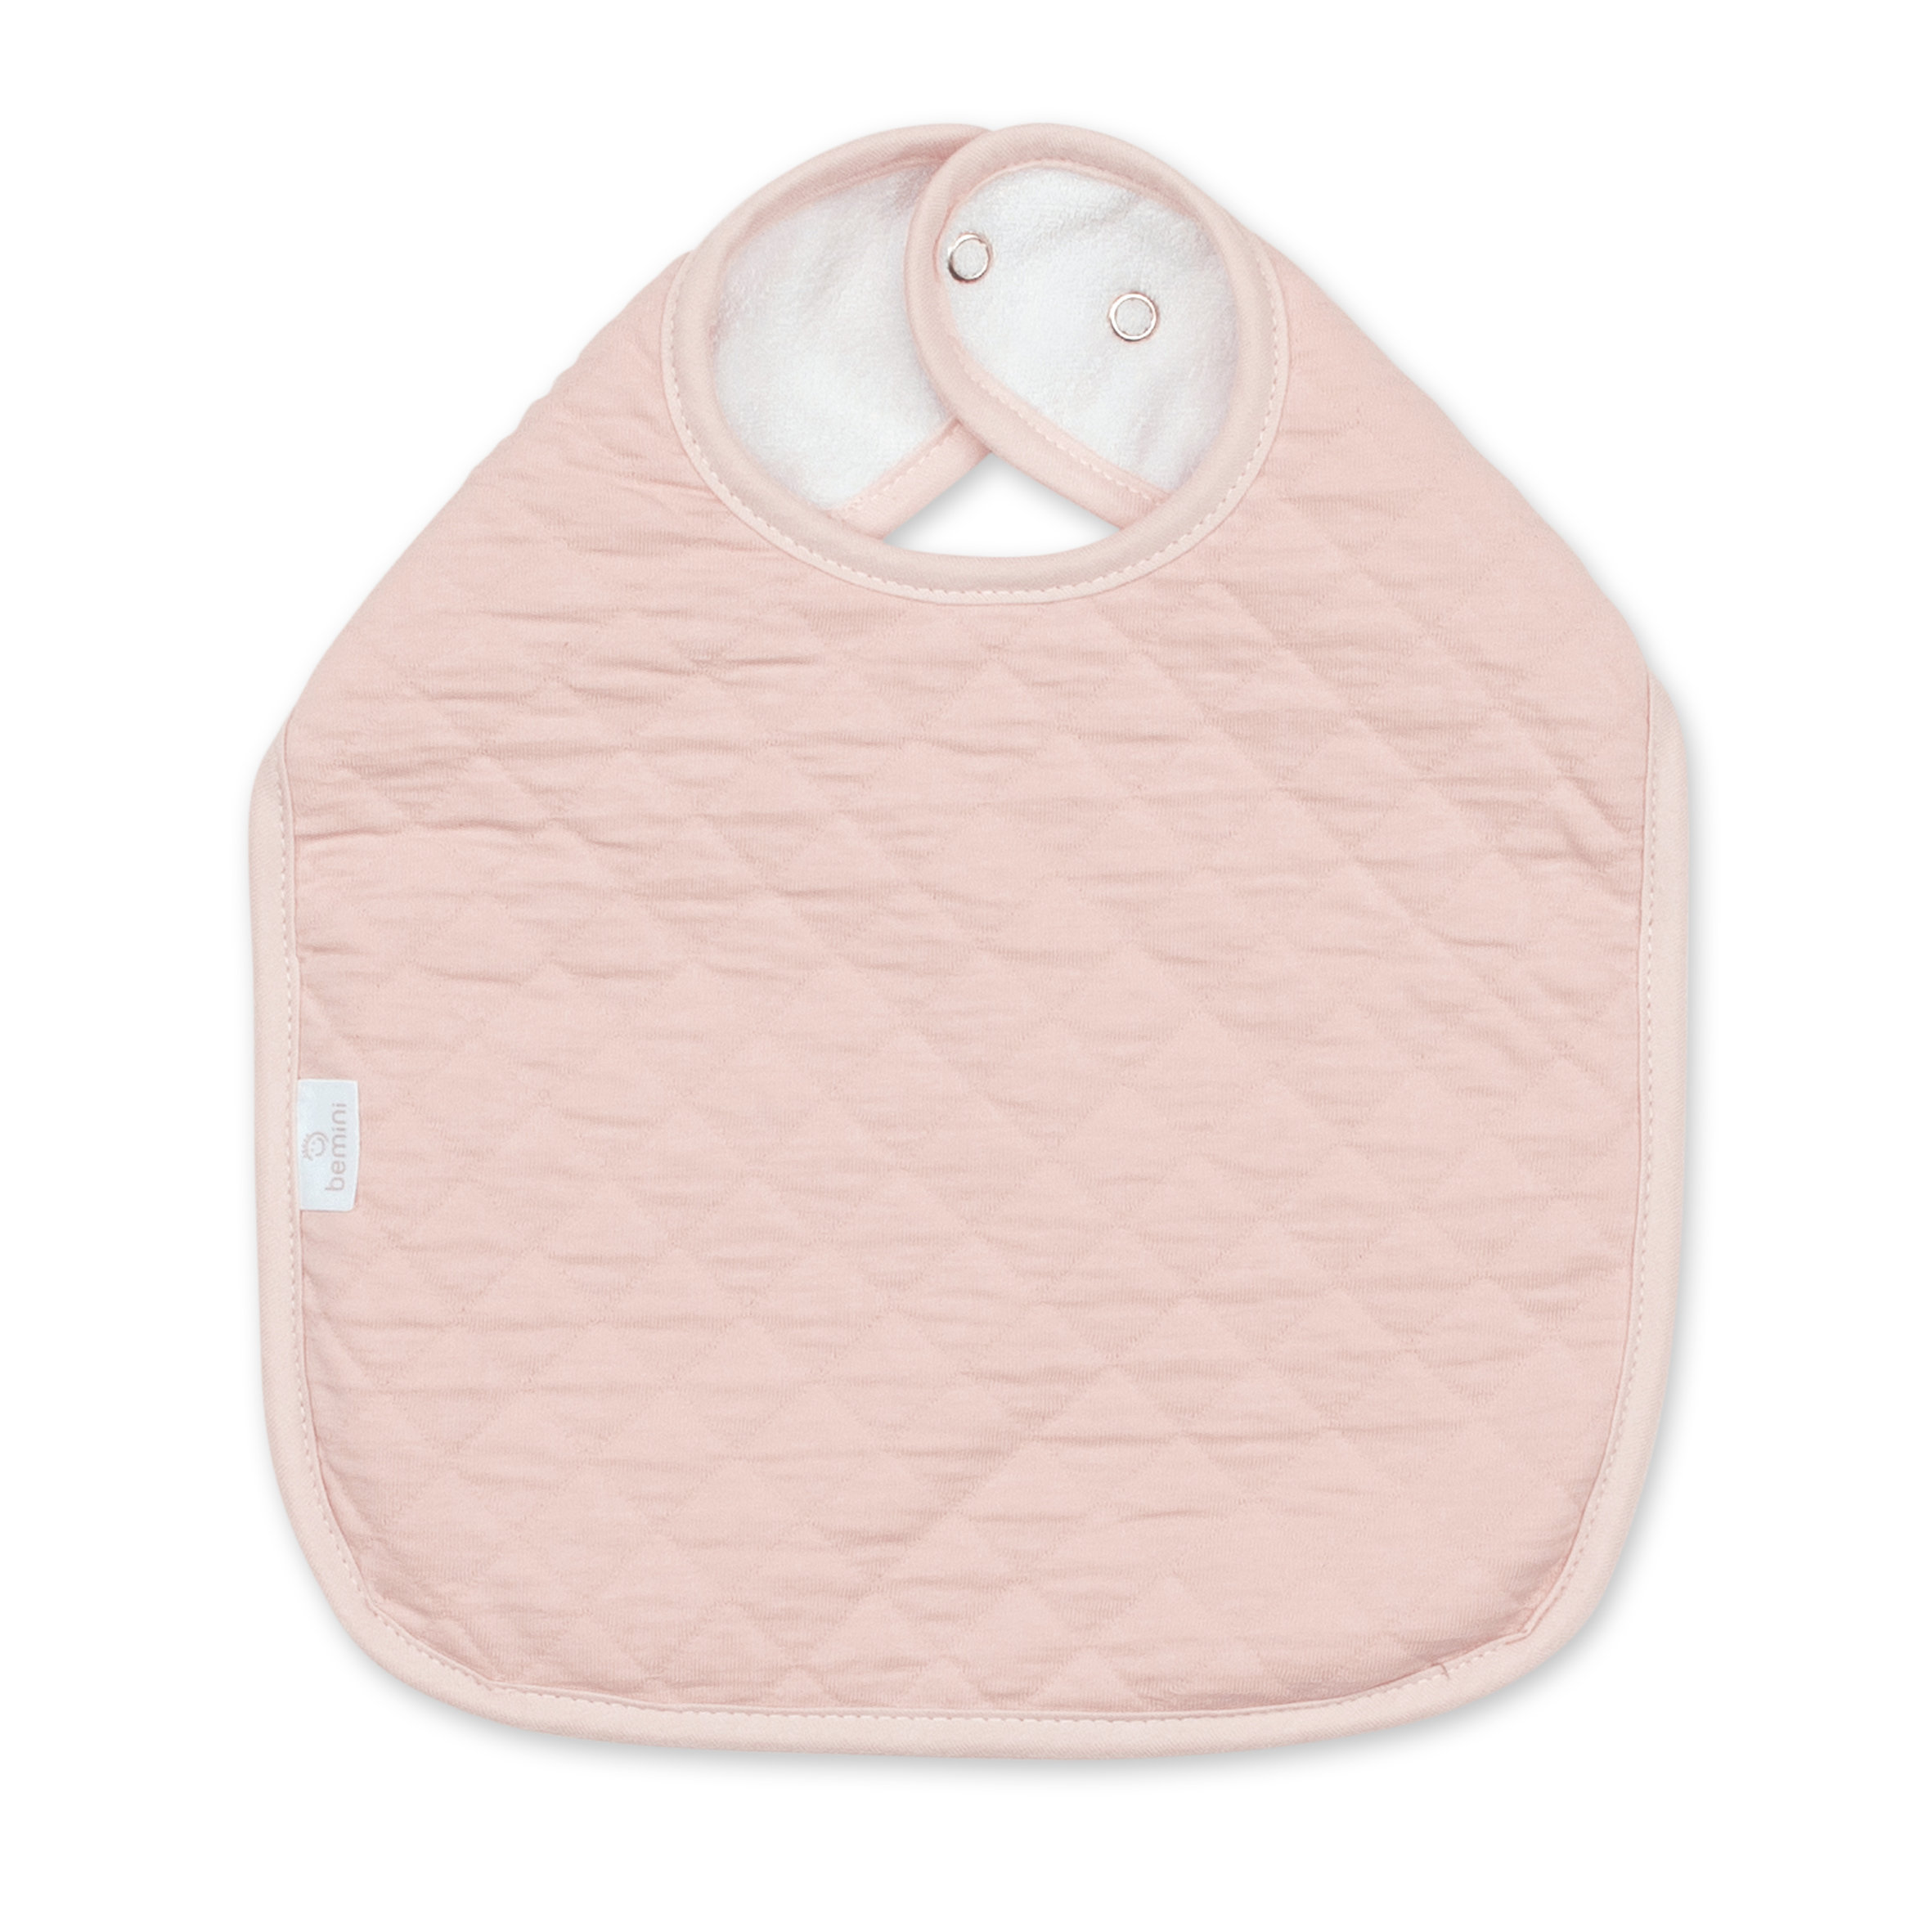 Slab waterproof Pady quilted jersey 37cm QUILT Blush